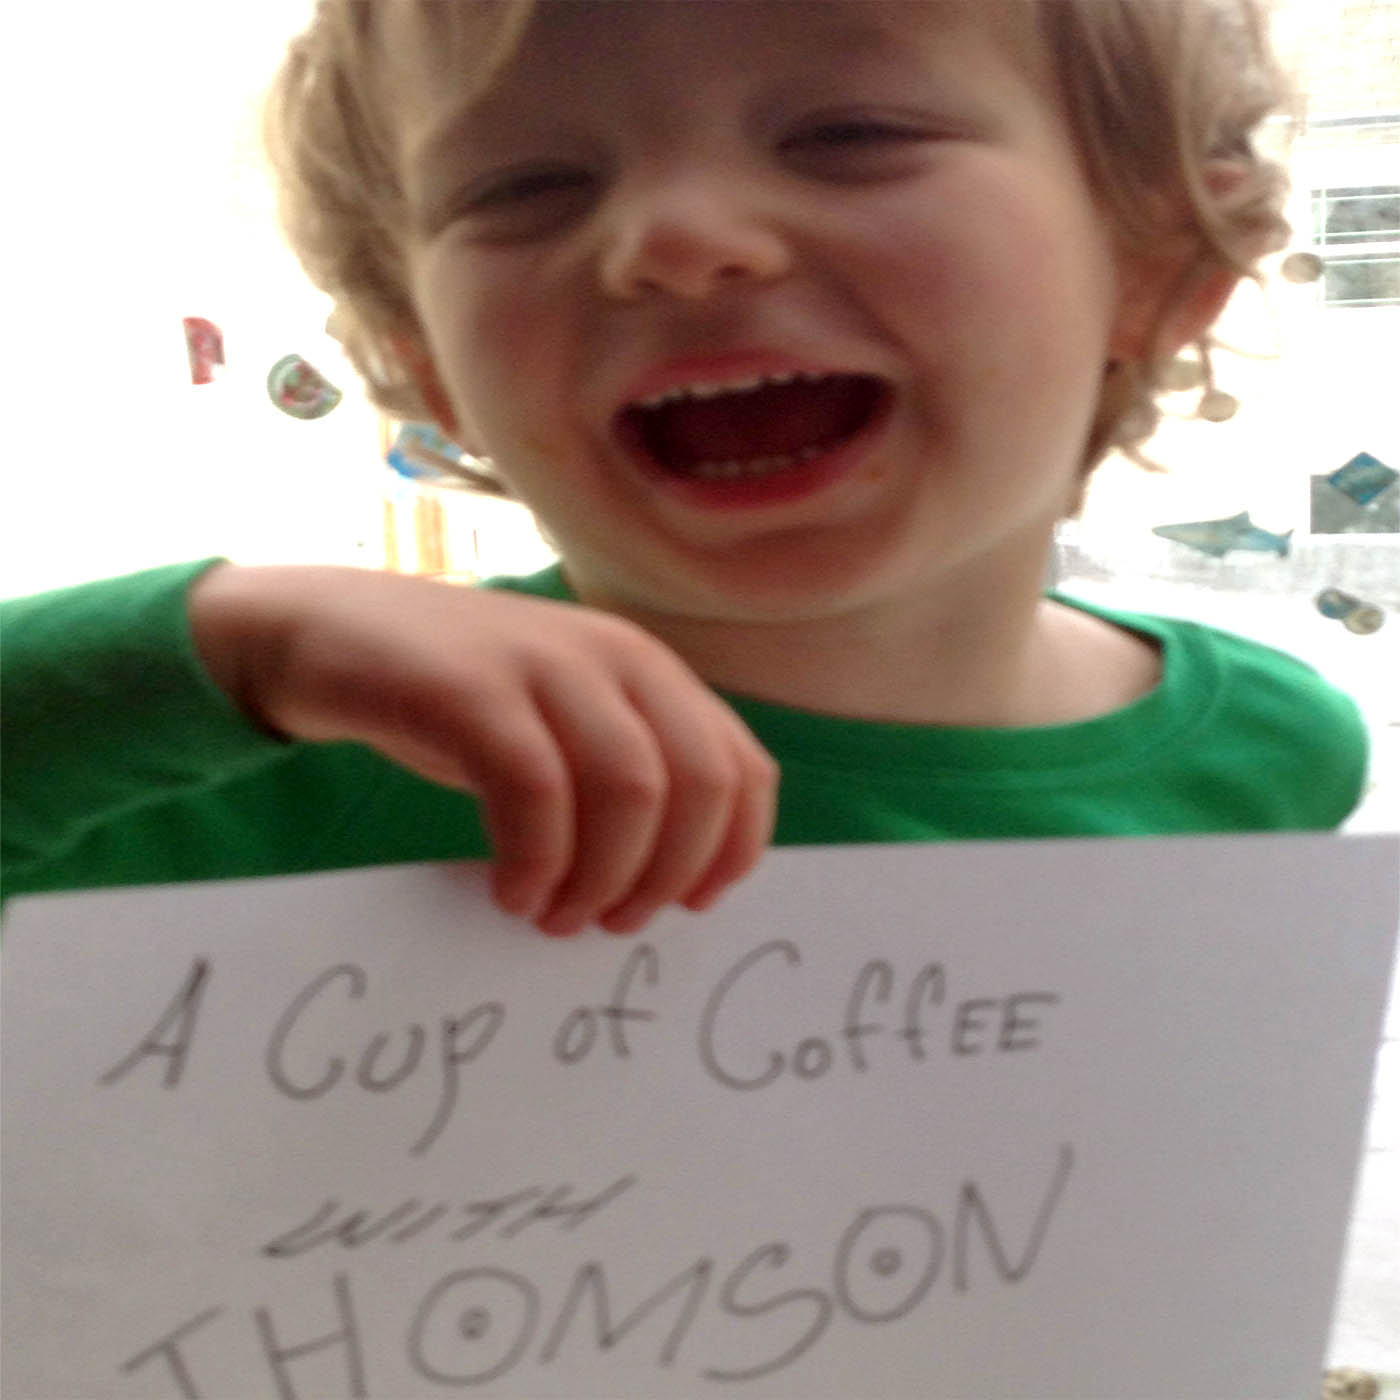 A Cup of Coffee with Thomson, Ep4